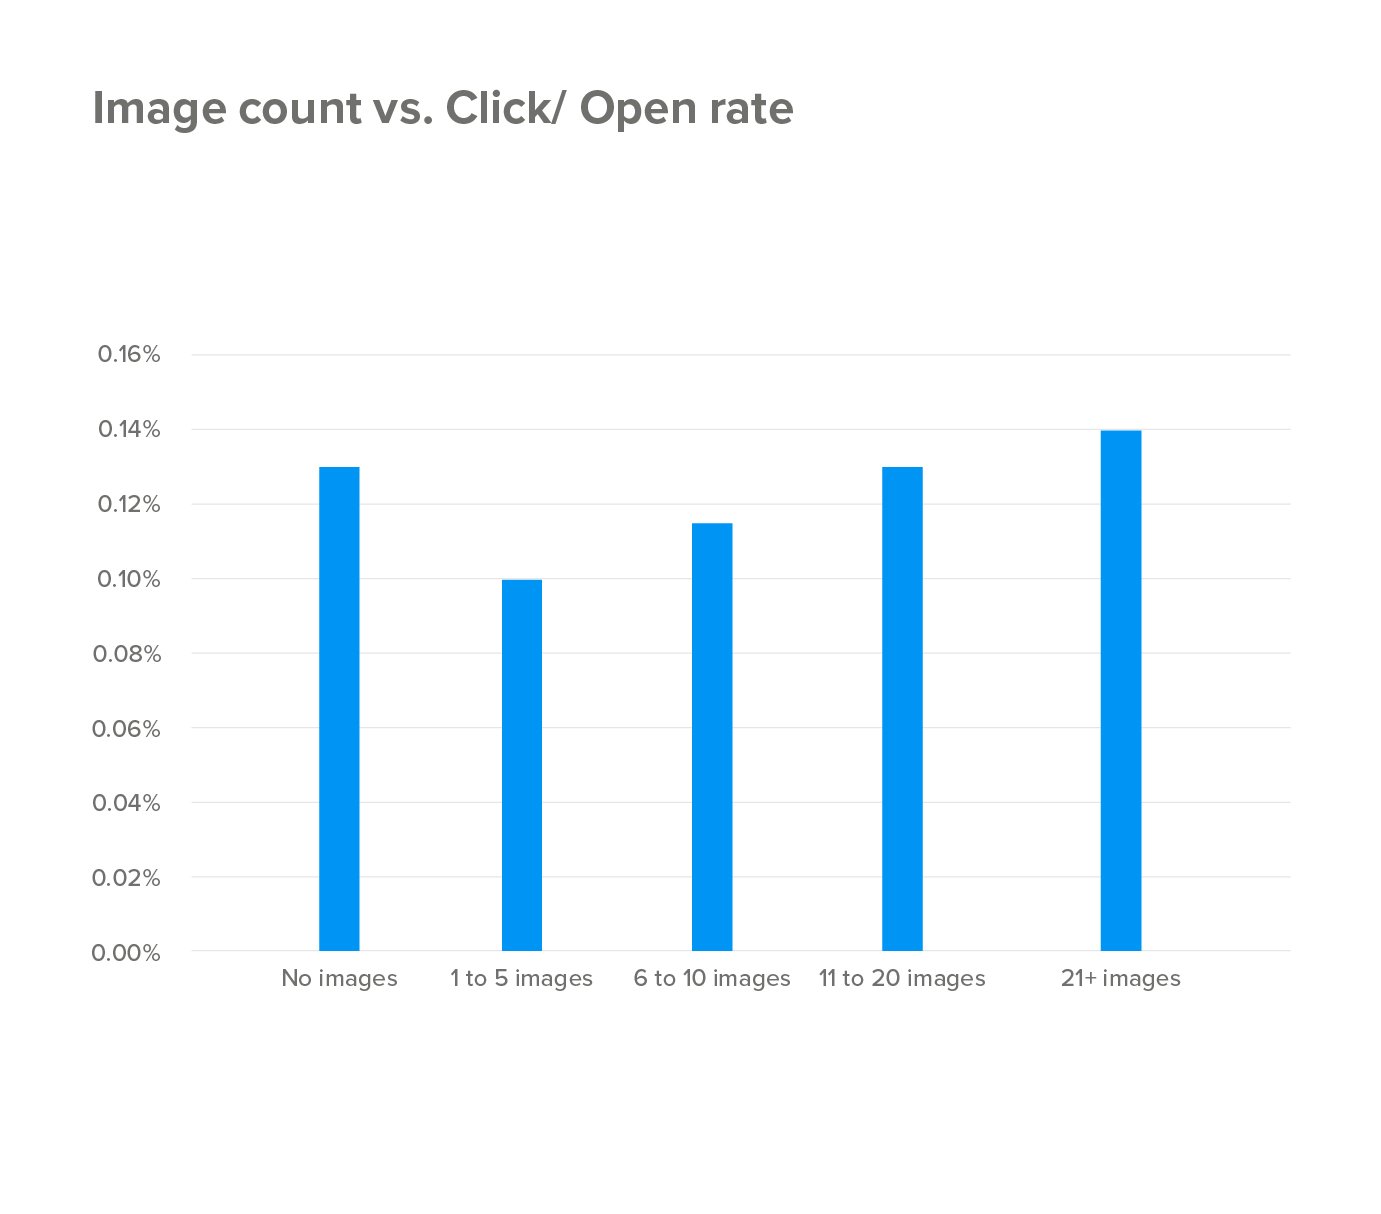 How number of images impact email click through rates